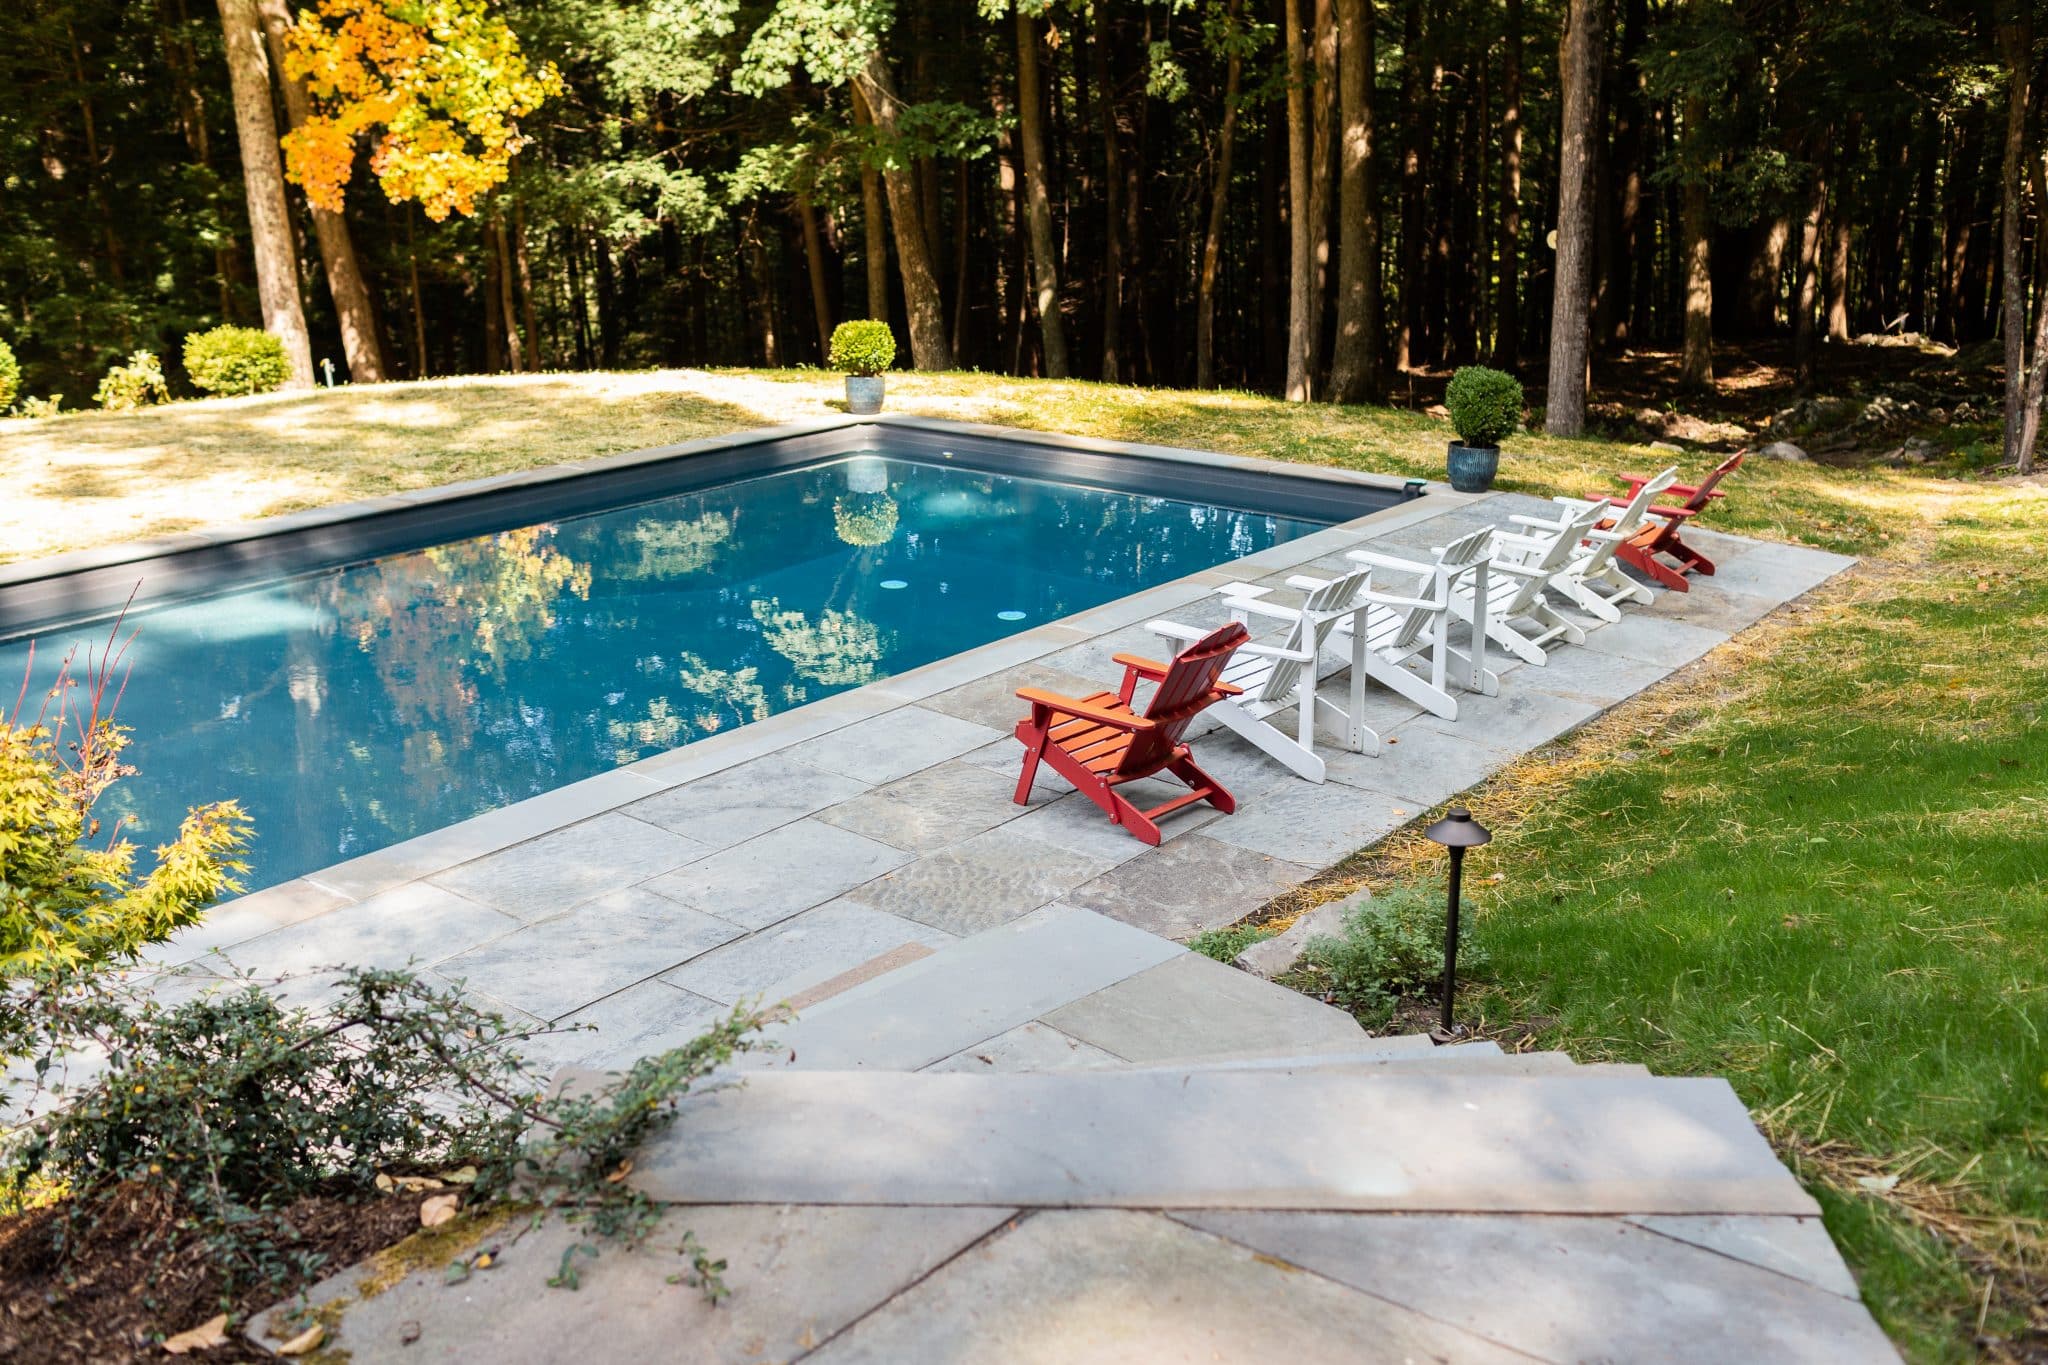 A pool with a bluestone patio and colorful chairs in the sunlight in Woodstock, NY.